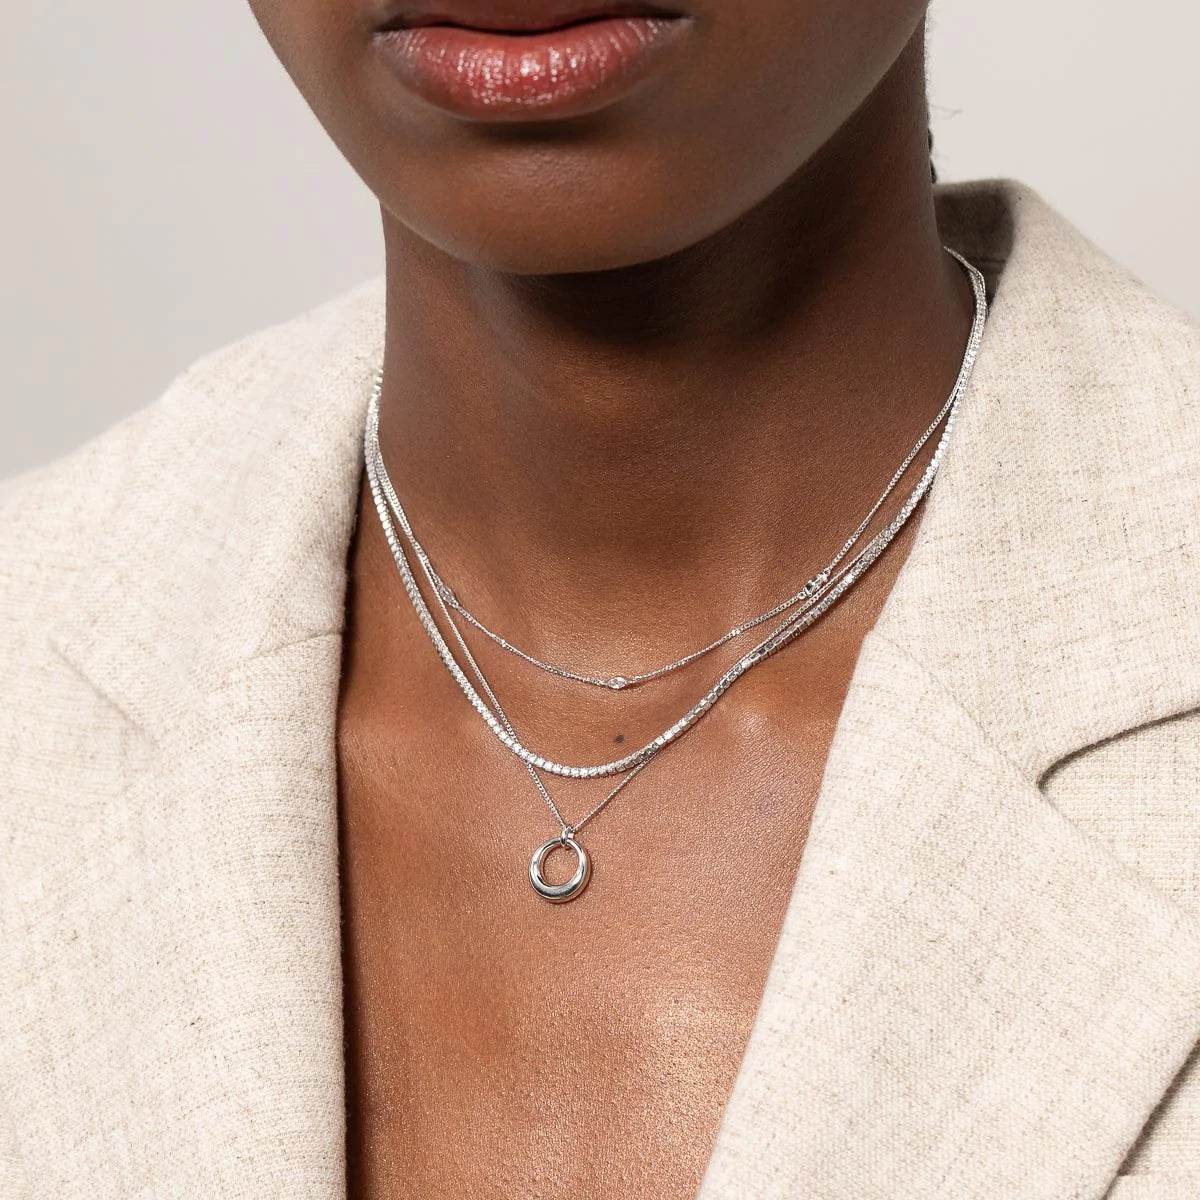 Station Navette Crystal Necklace in Silver worn layered with necklaces